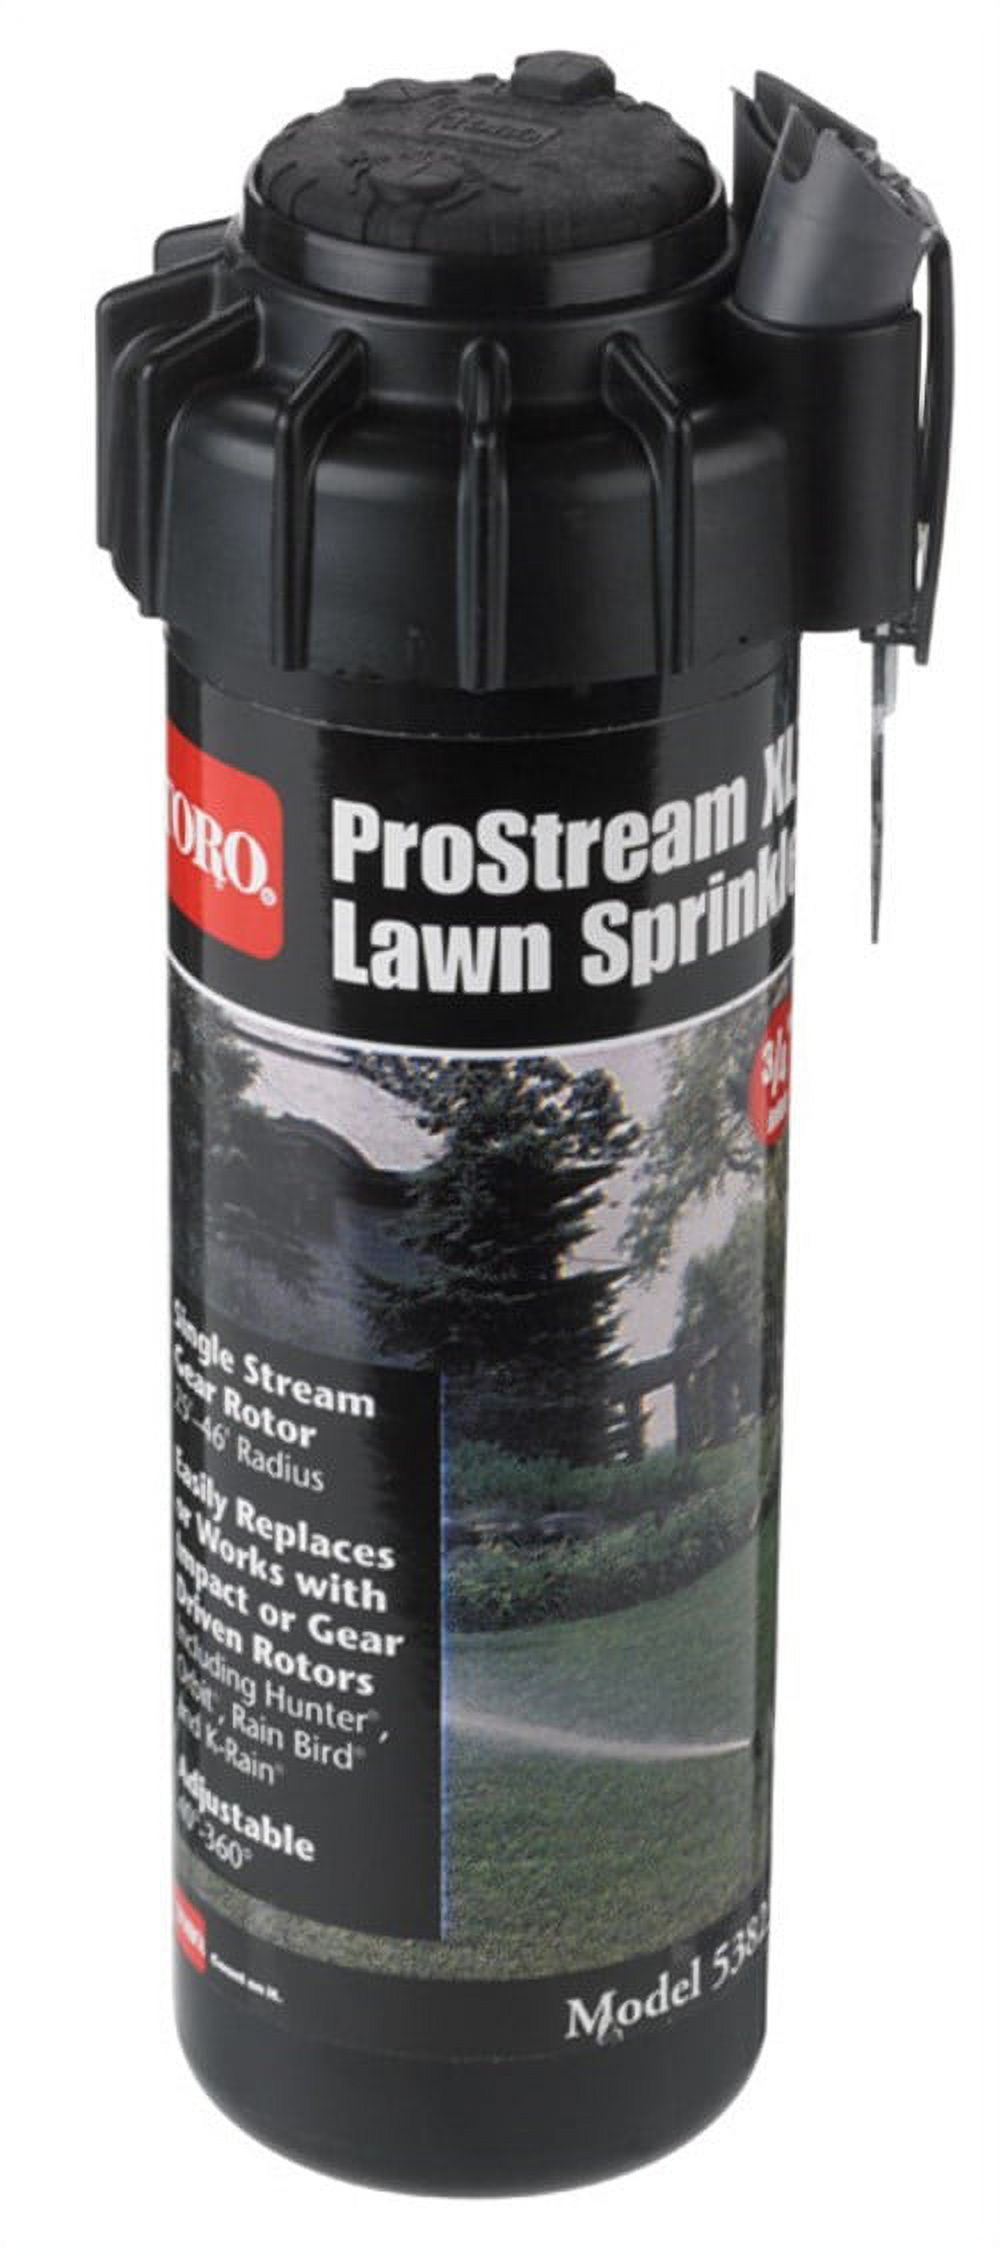 Toro 53823 5" ProStream XL Lawn Sprinkler with Nozzles - image 2 of 2